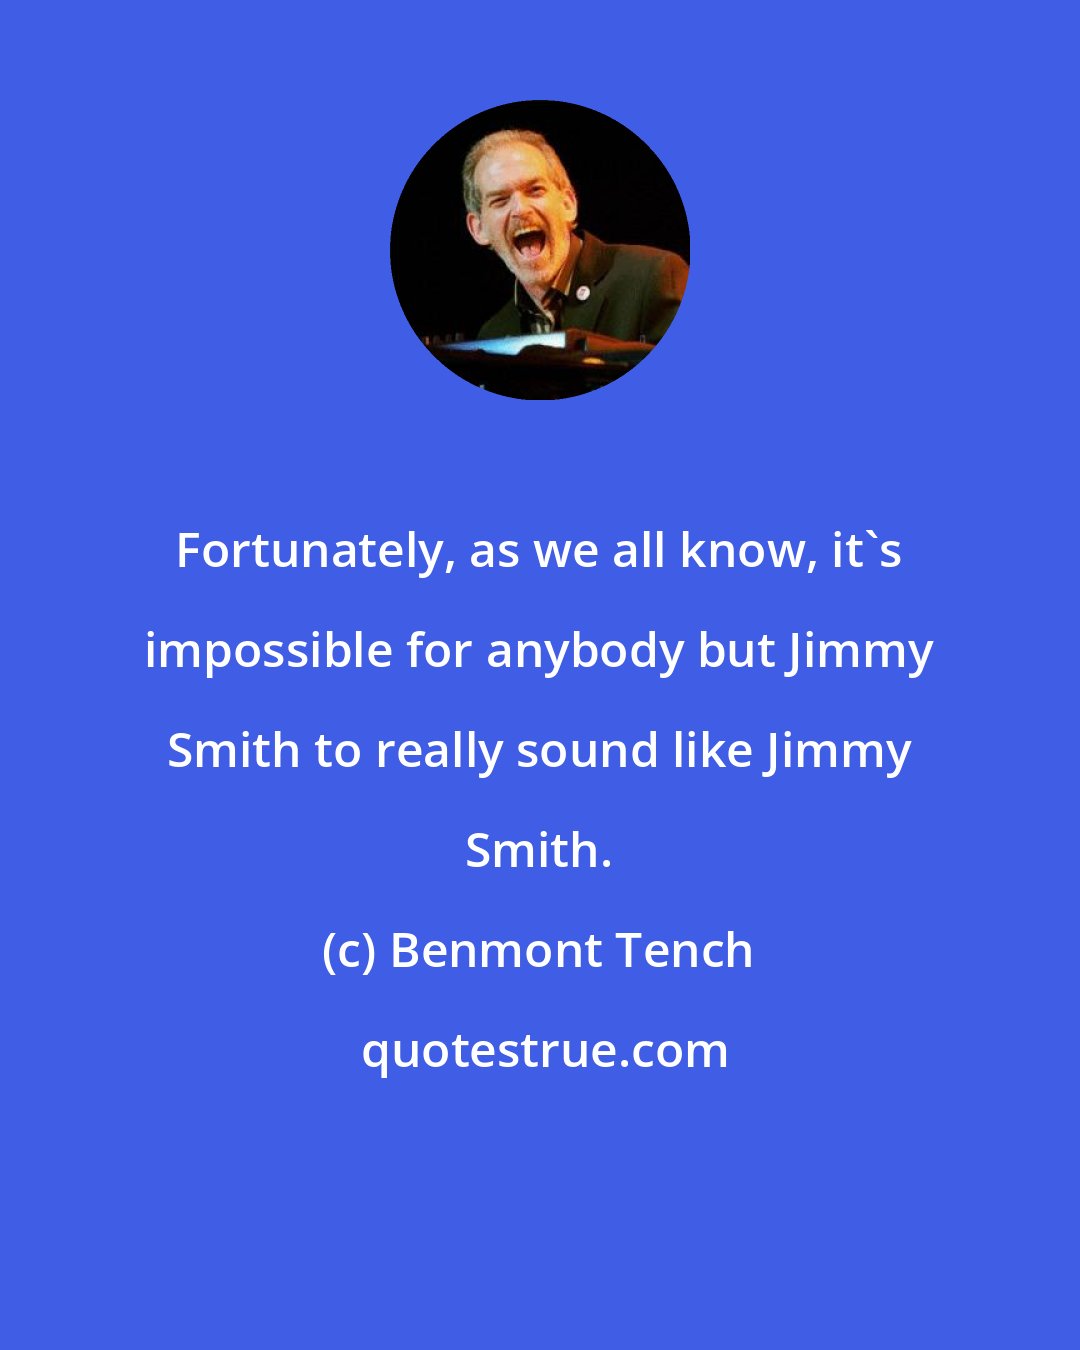 Benmont Tench: Fortunately, as we all know, it's impossible for anybody but Jimmy Smith to really sound like Jimmy Smith.